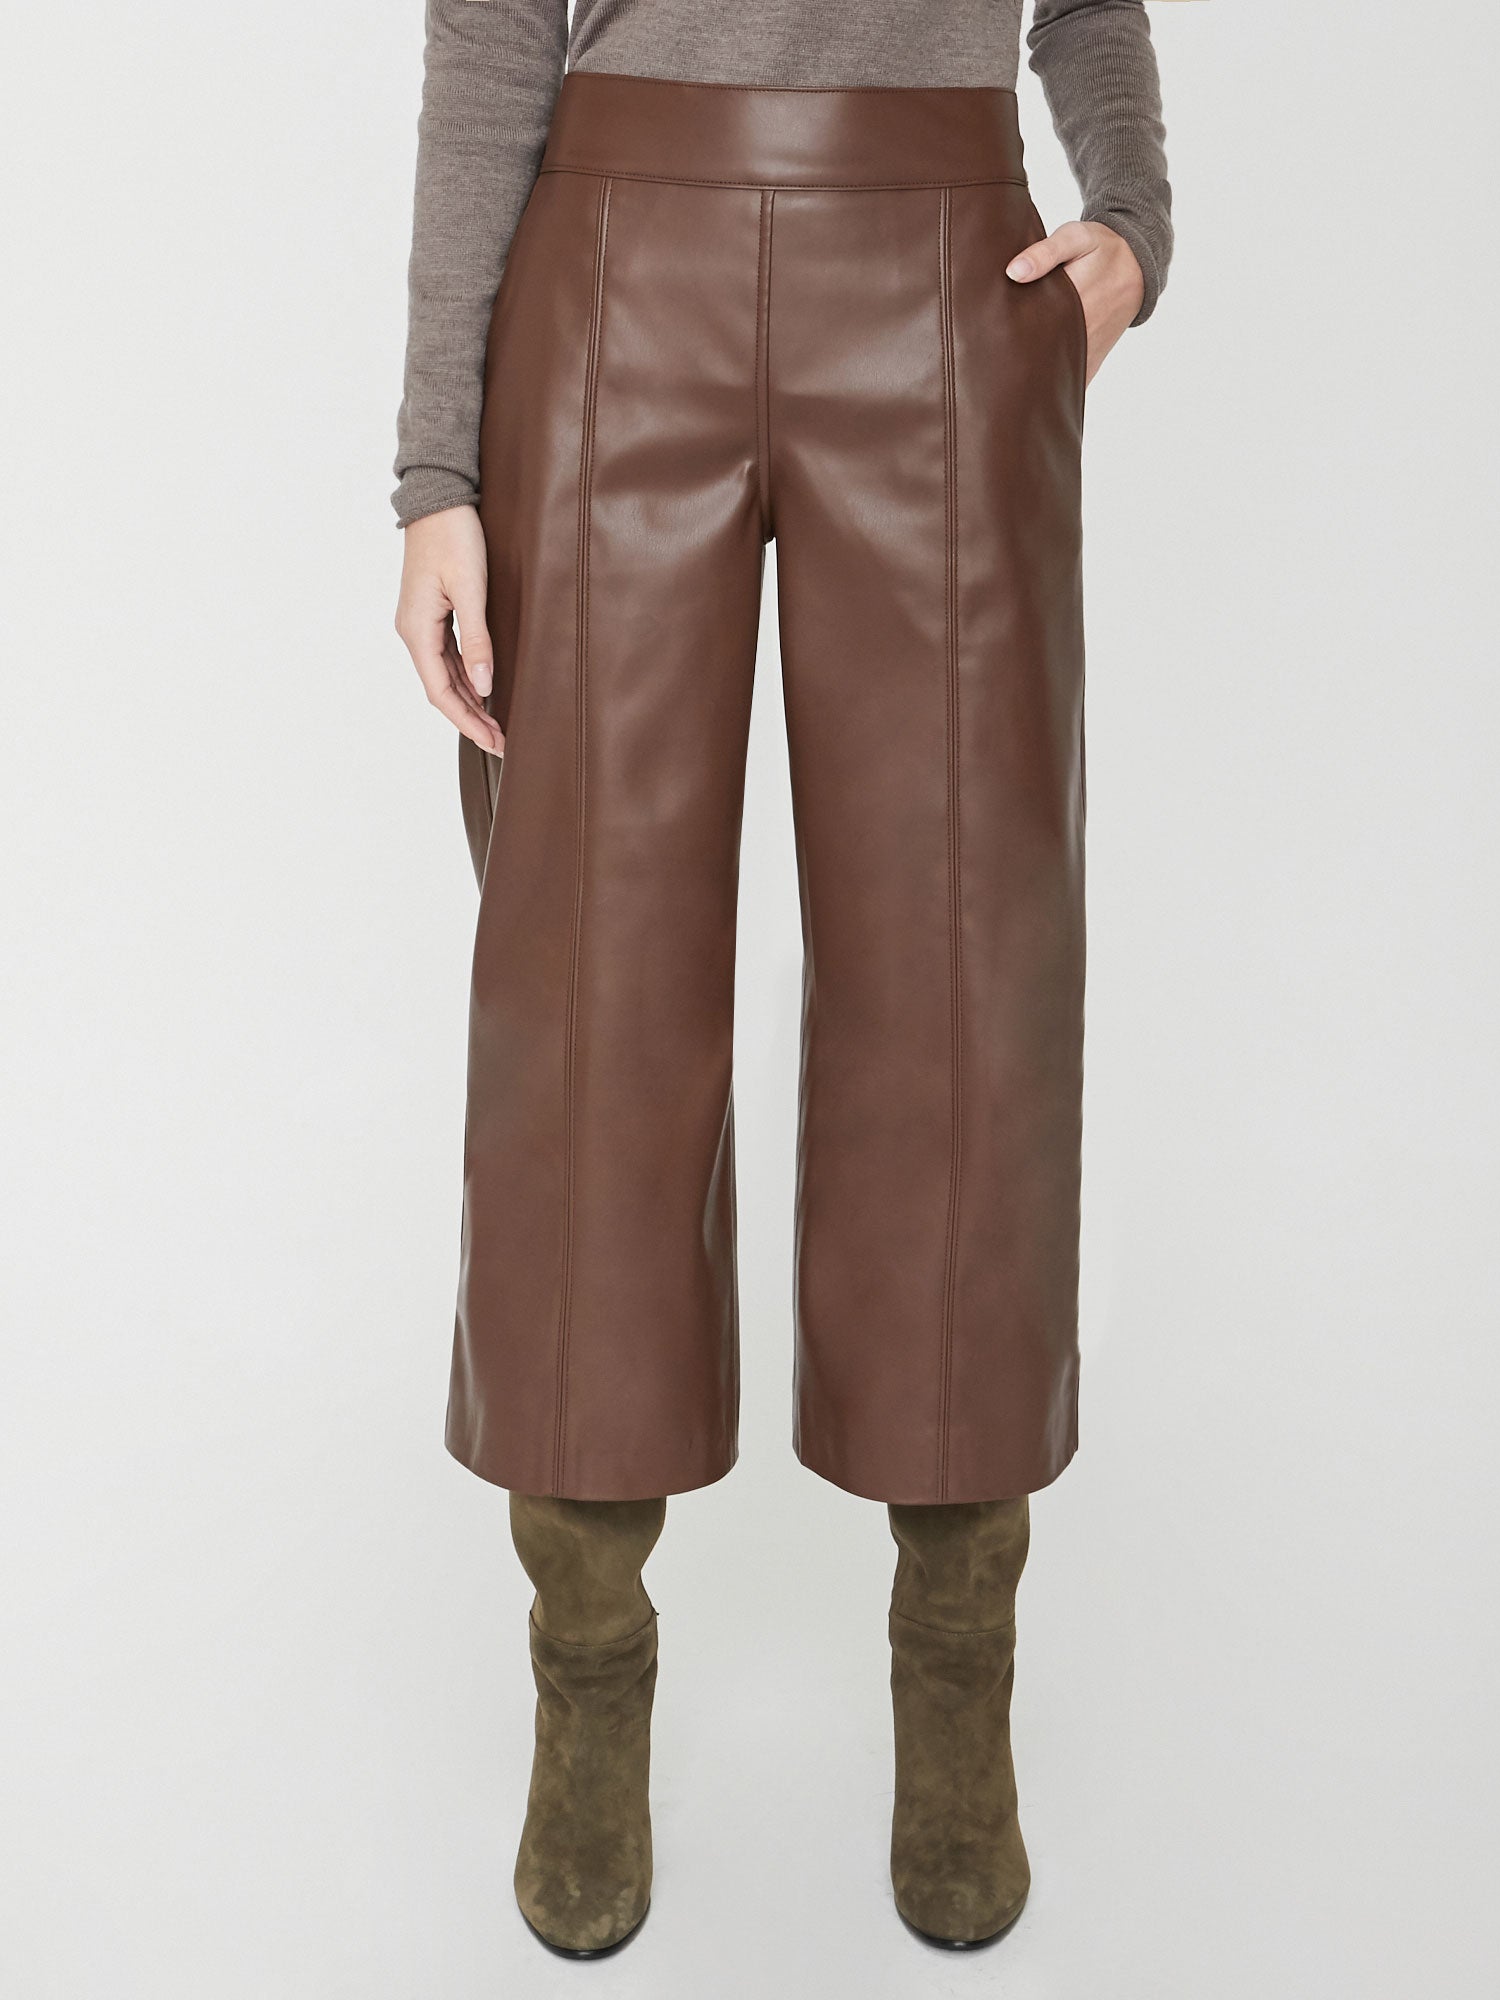 Women Genuine Suede Flared Pants Brown Real Leather Trousers Designer  Bottoms